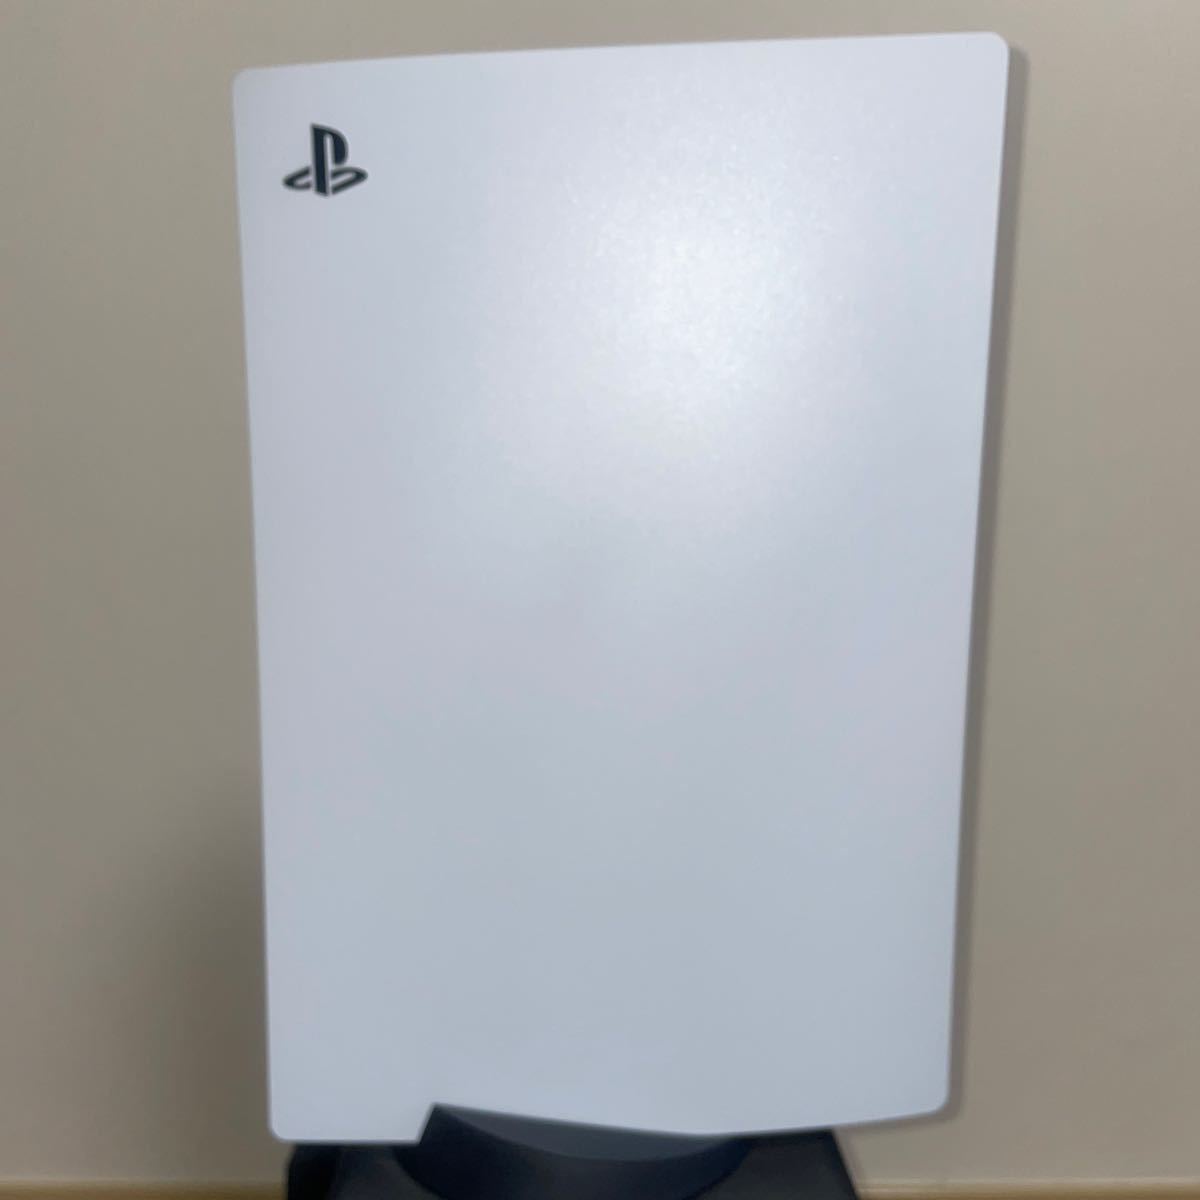 PS5] PlayStation 5 CFI-1000A01 [美品 延長保証サ-ビスあり] [初期化 